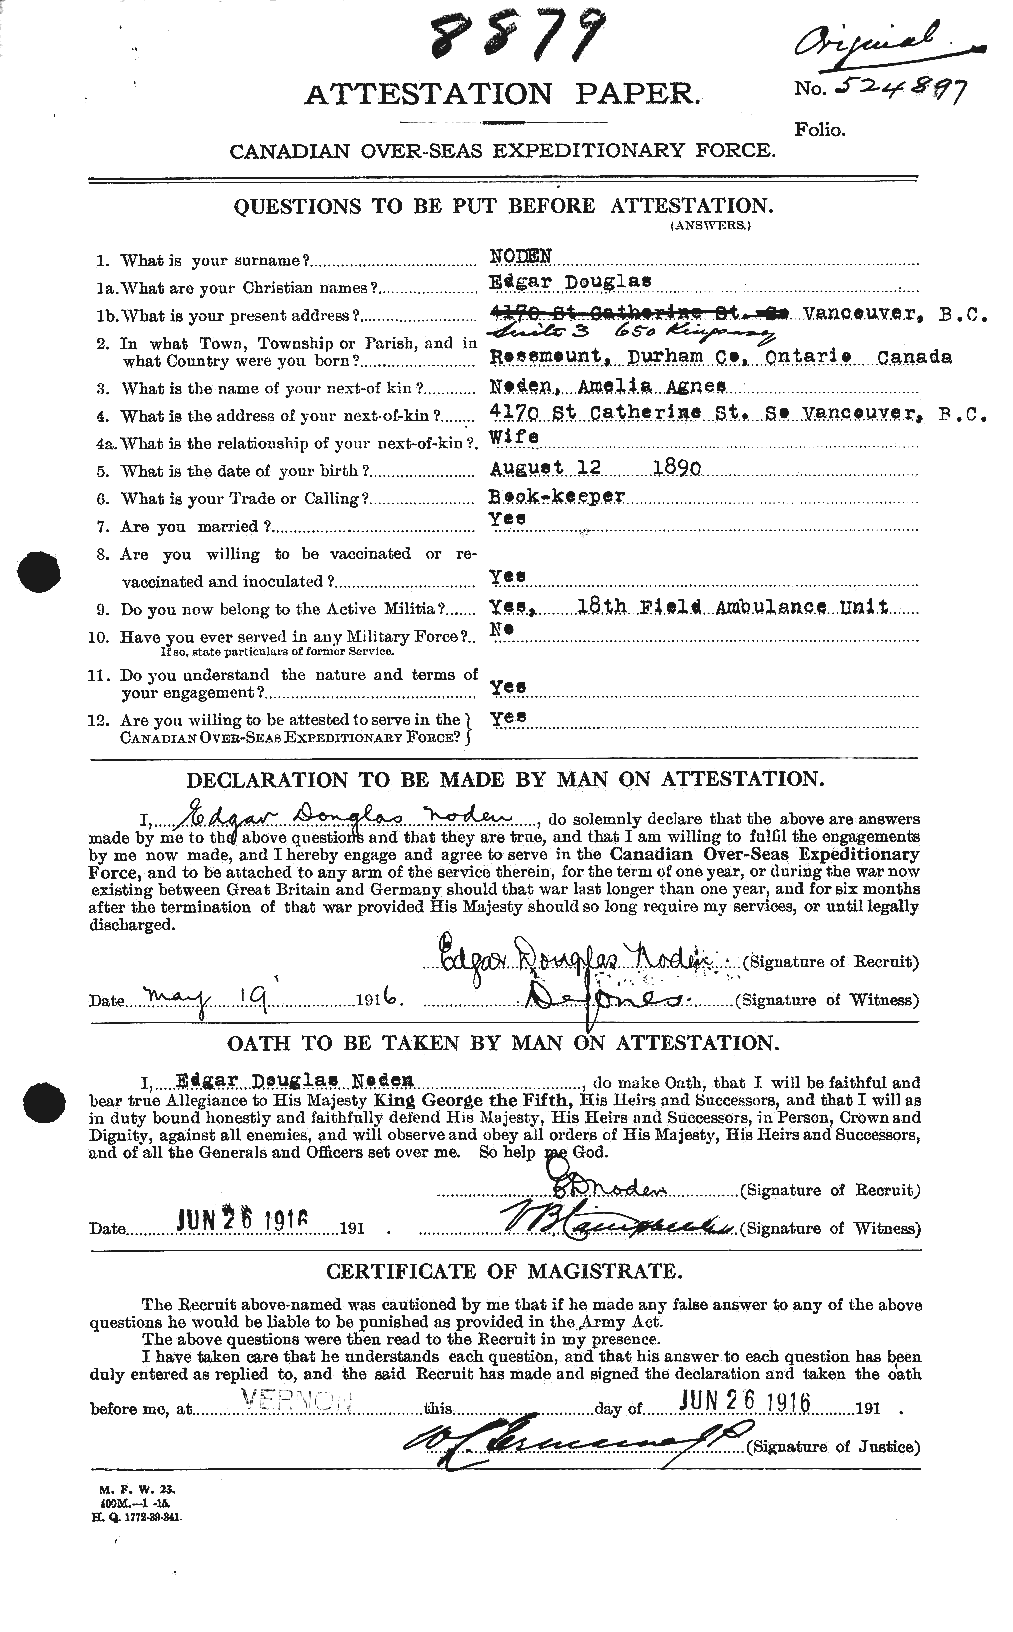 Personnel Records of the First World War - CEF 548340a